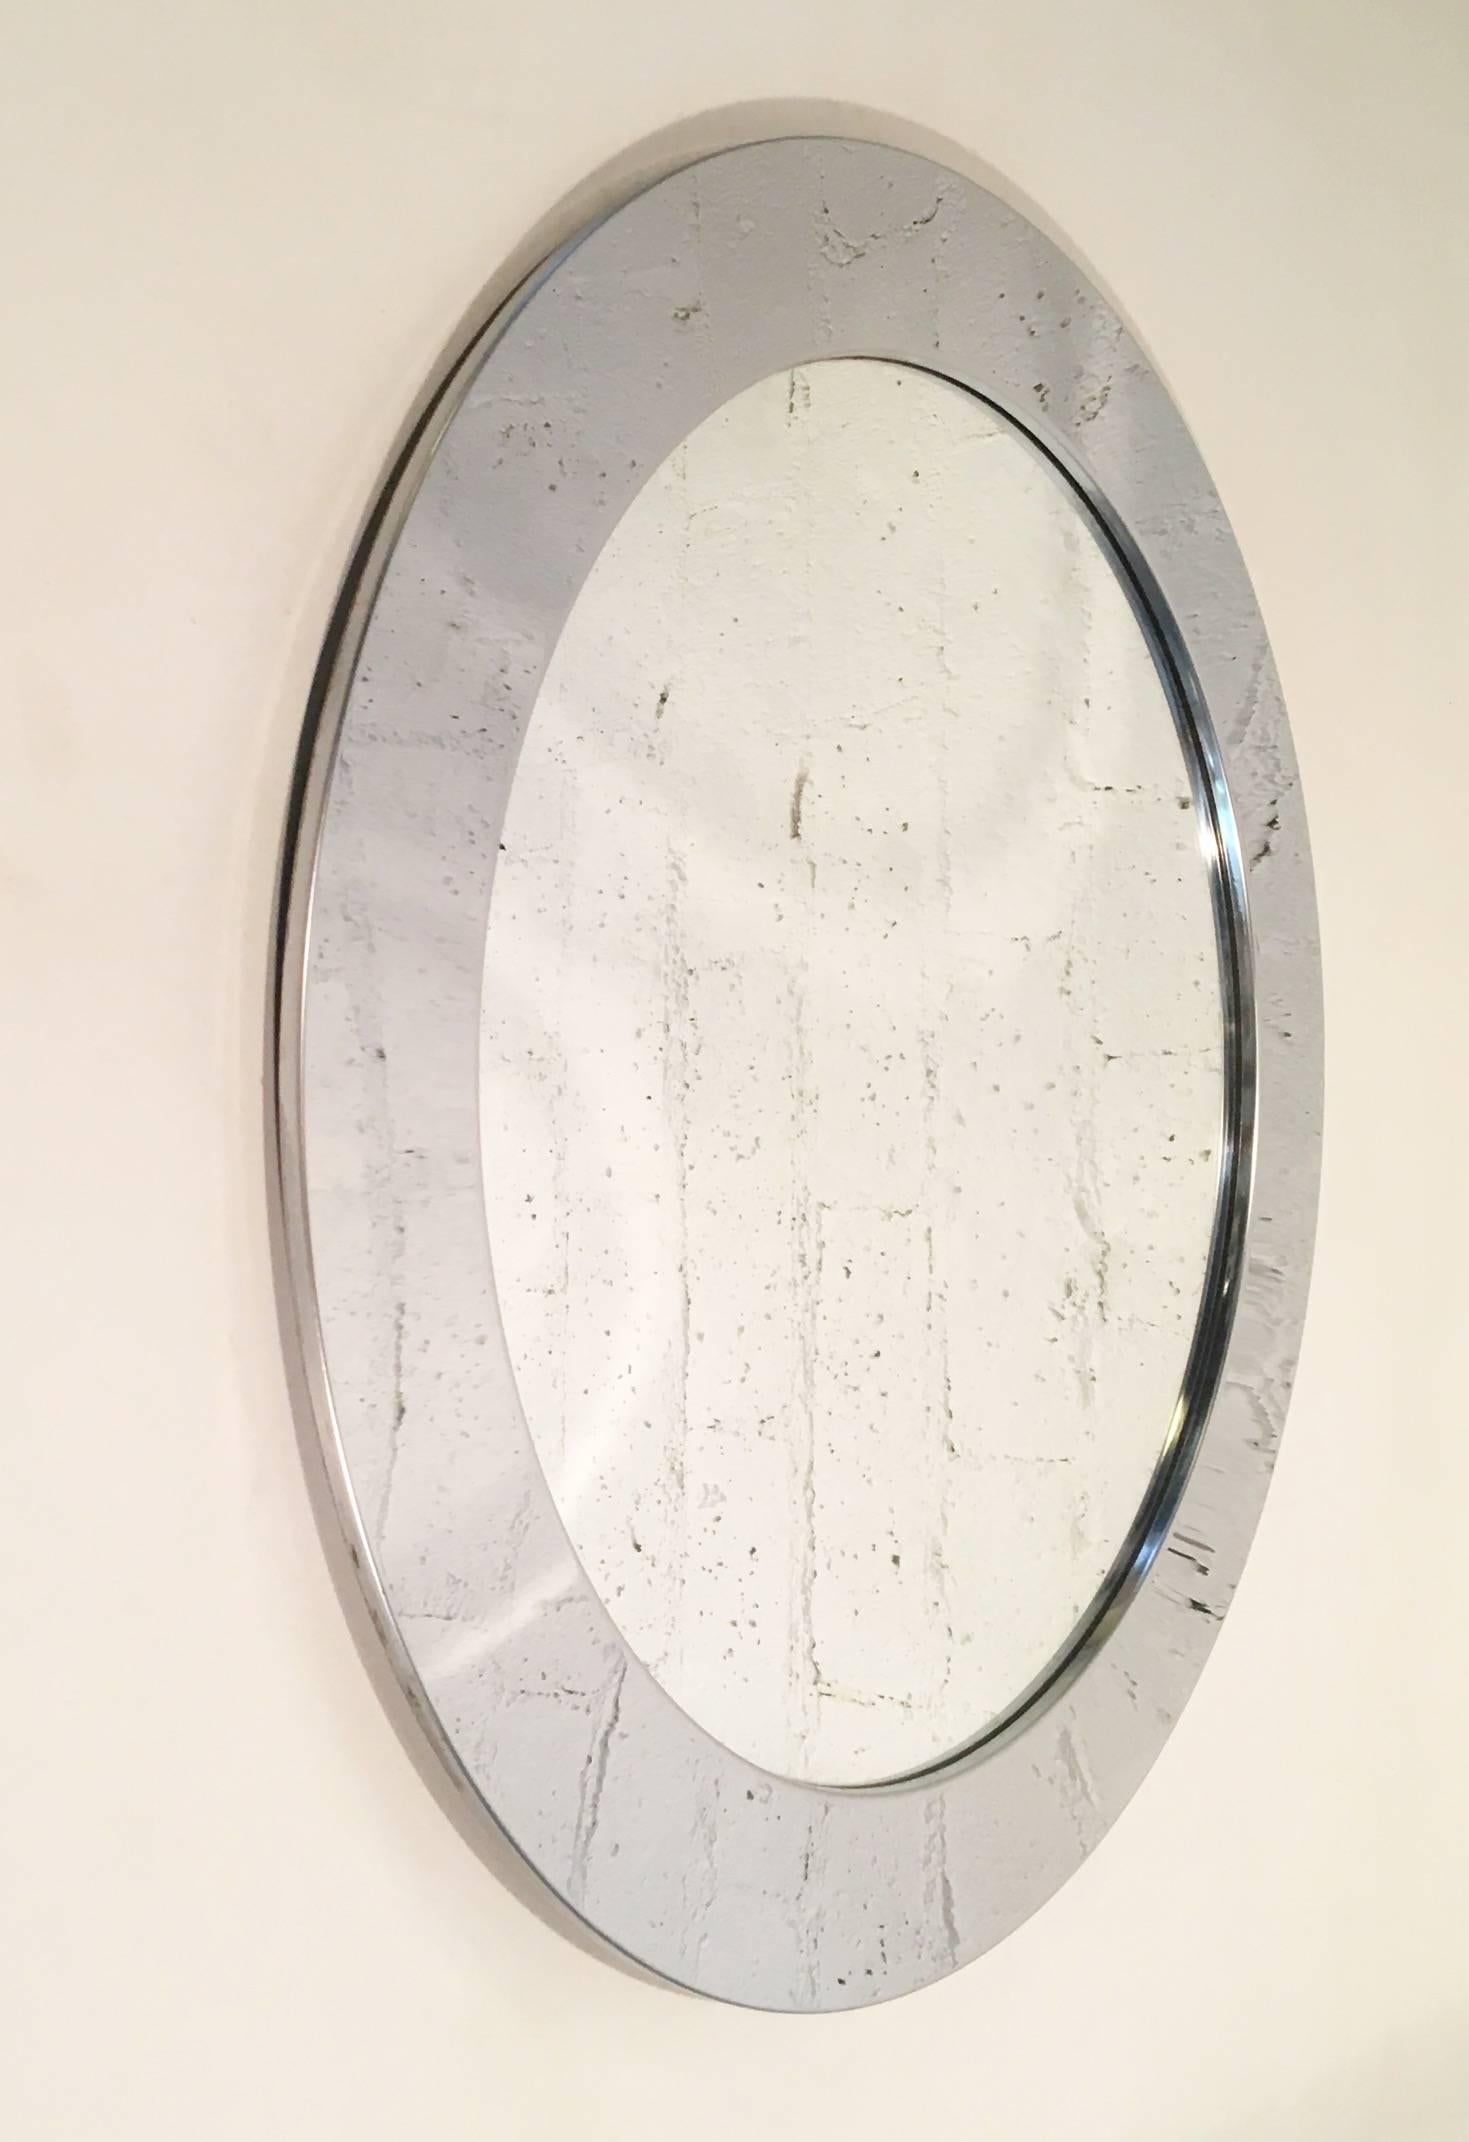 A chrome round mirror designed by Curtis Jeré for Artisan House in the 1970s.
It's not signed but it retains the Artisan House tag on the back see photos.